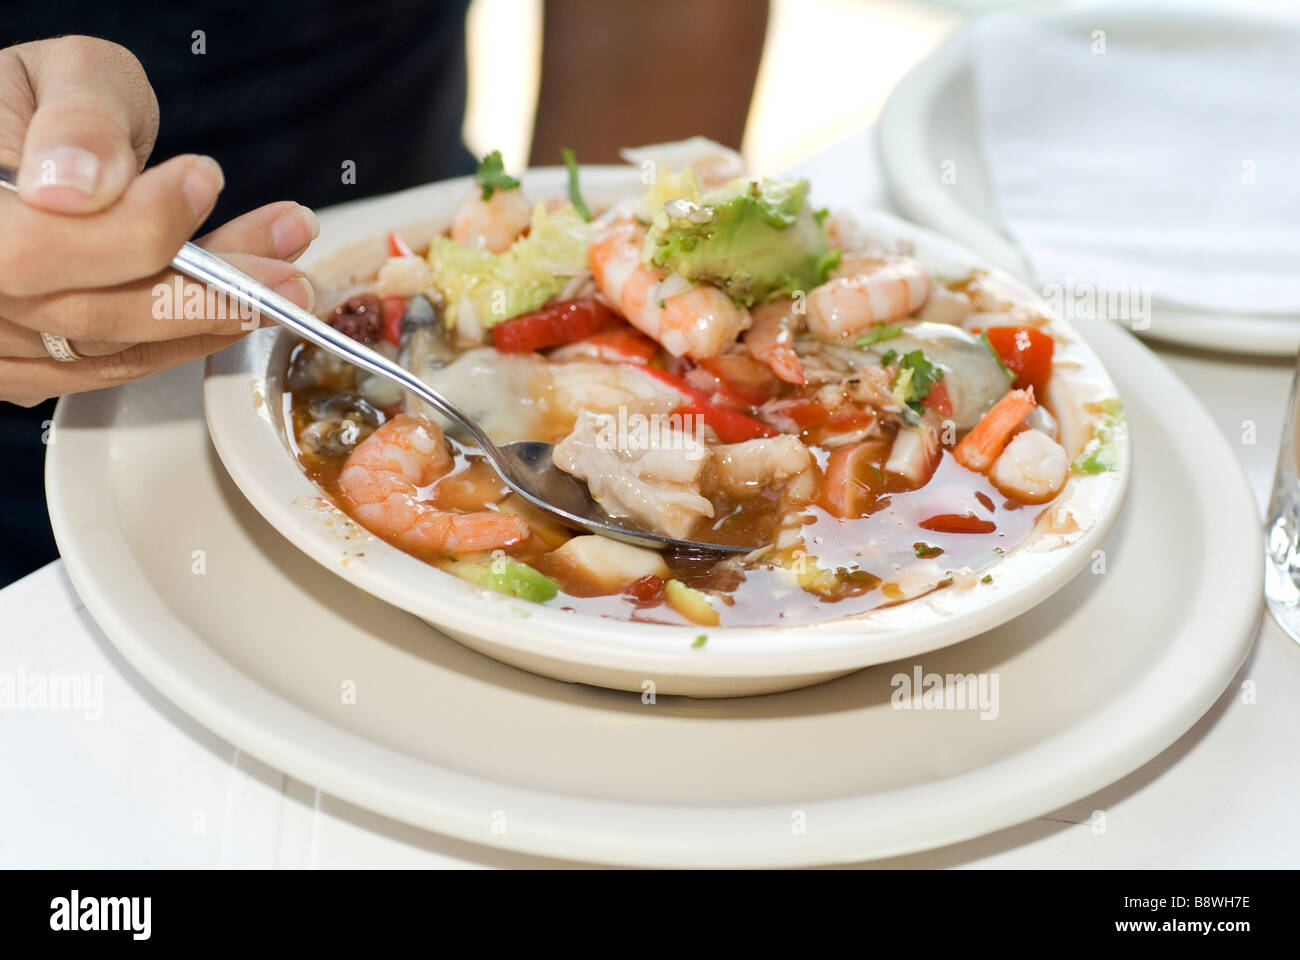 a tourist eating soup with seafood Stock Photo